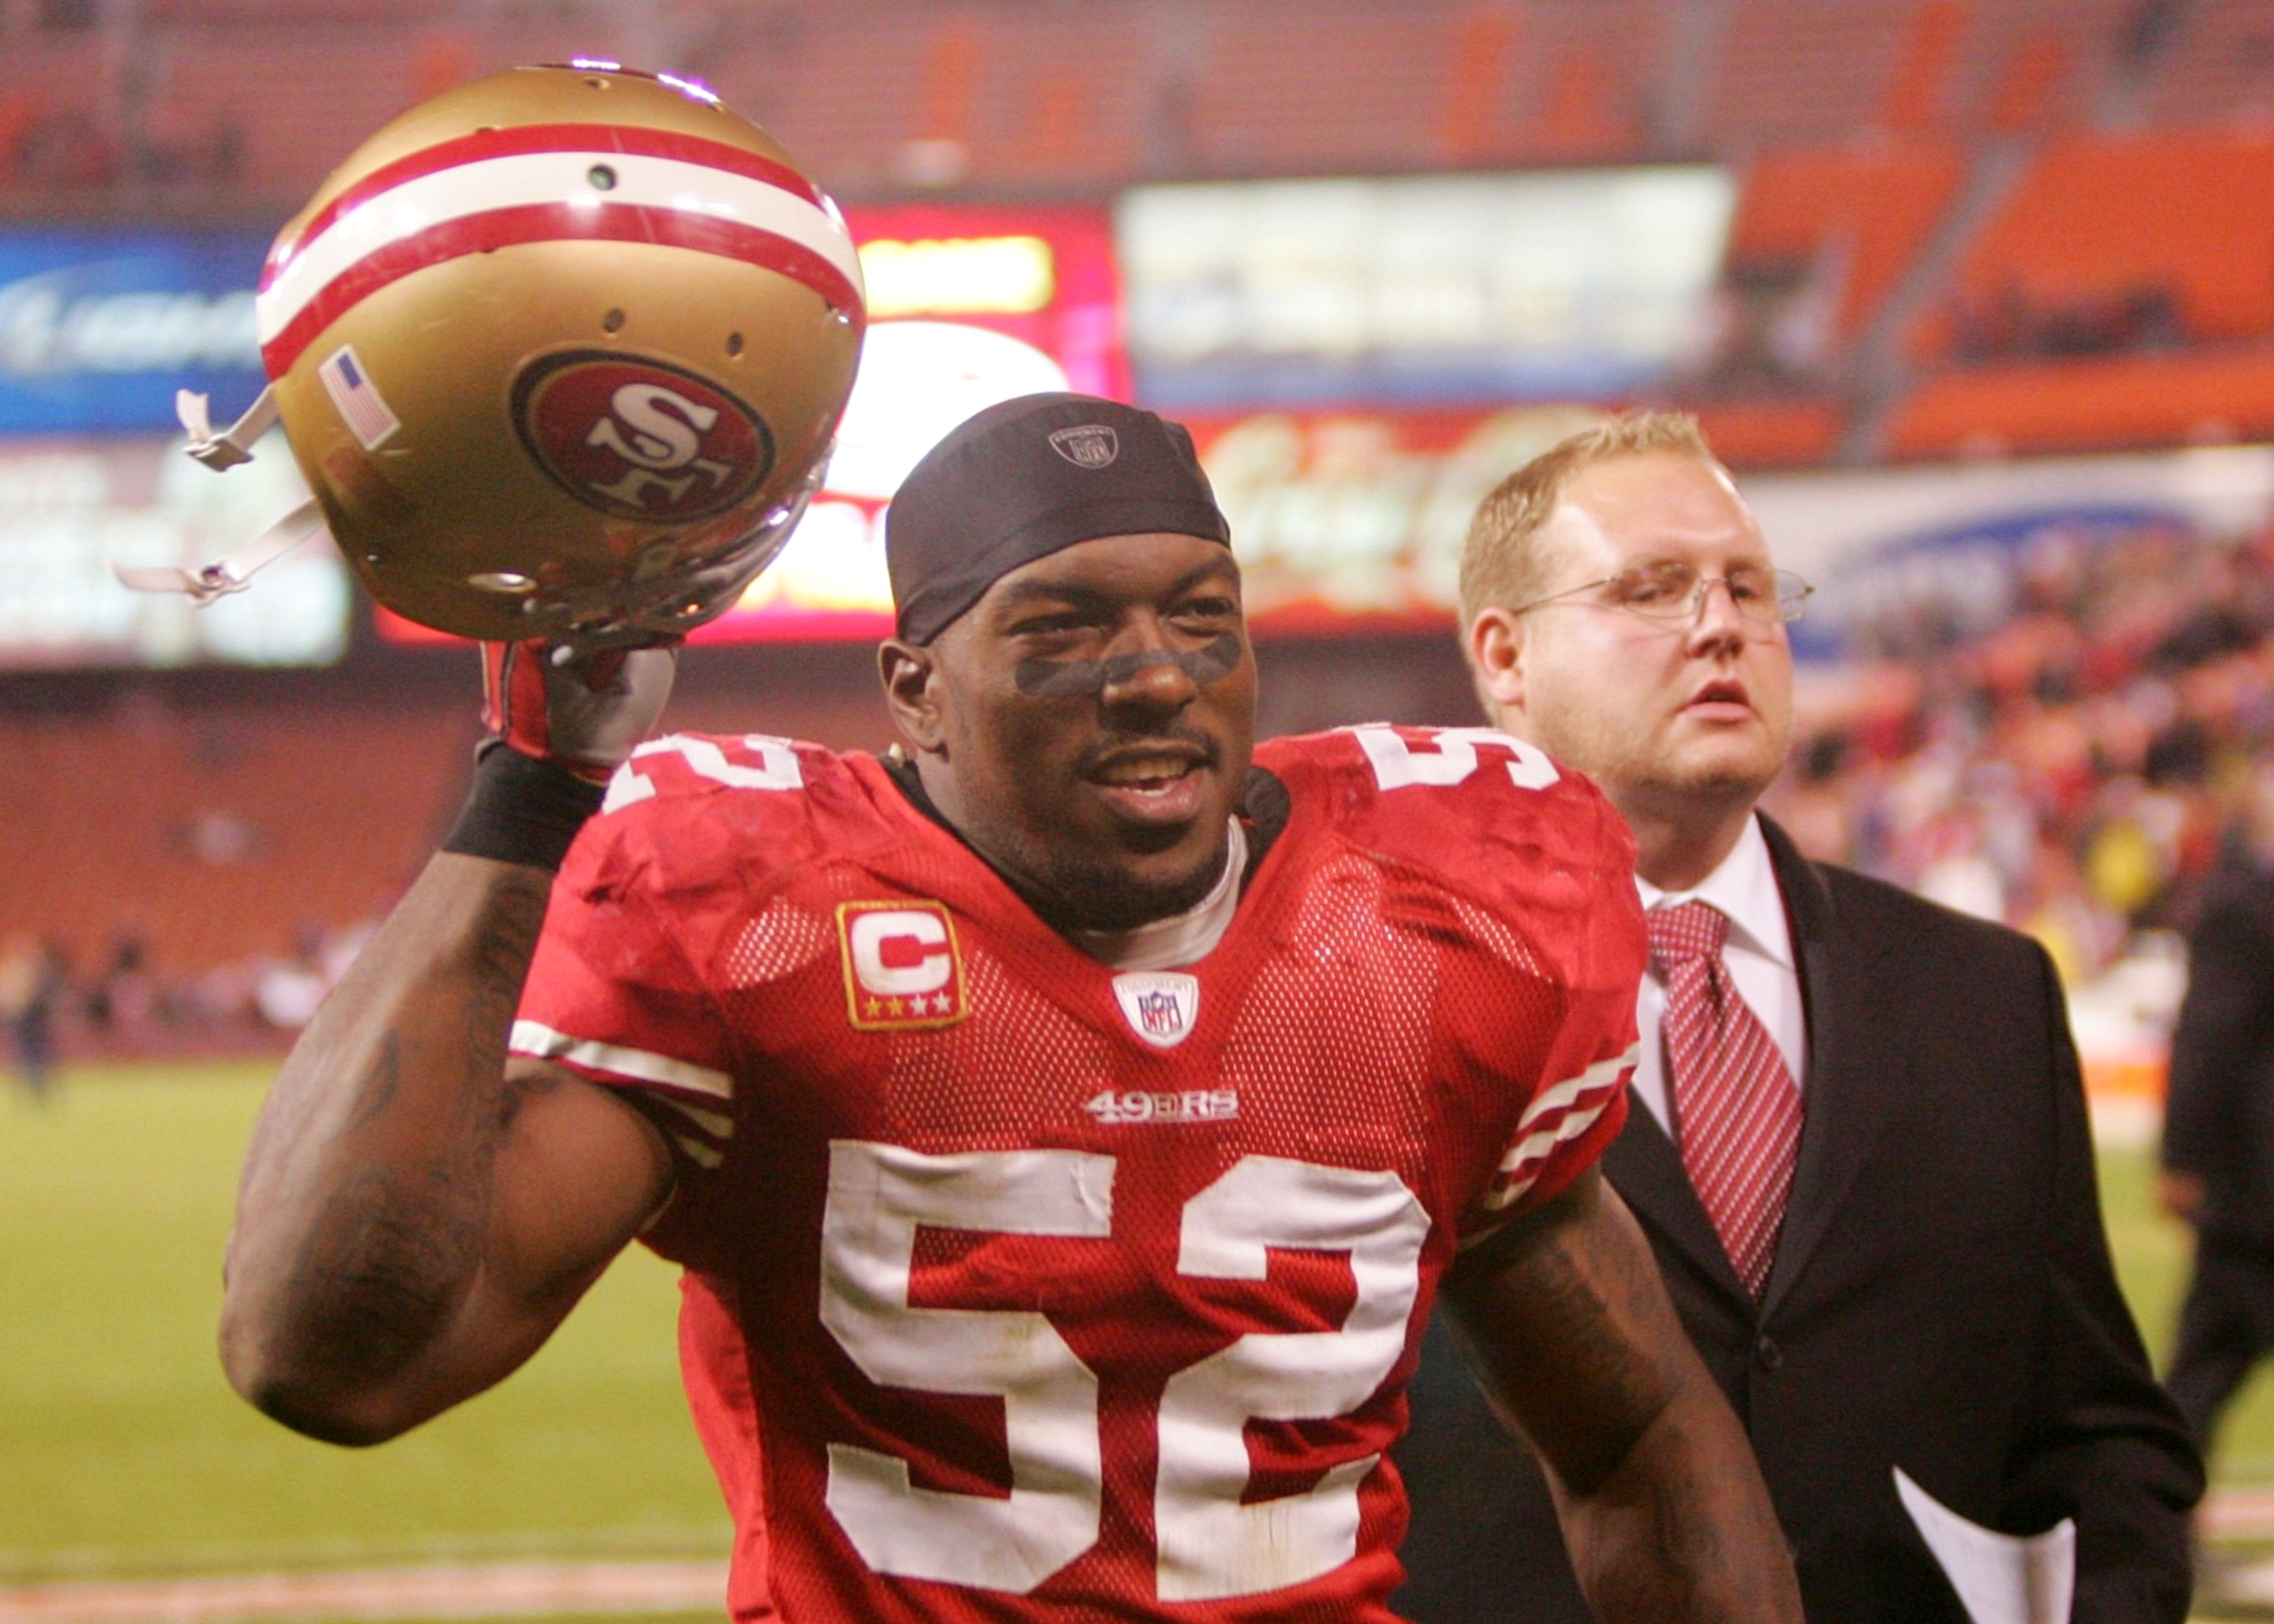 SAN FRANCISCO - DECEMBER 14:  Linebacker Patrick Willis #52 of the San Francisco 49ers runs off the field after defeating the Arizona Cardinals at Candlestick Park on December 14, 2009 in San Francisco, California. (Photo by Ezra Shaw/Getty Images)